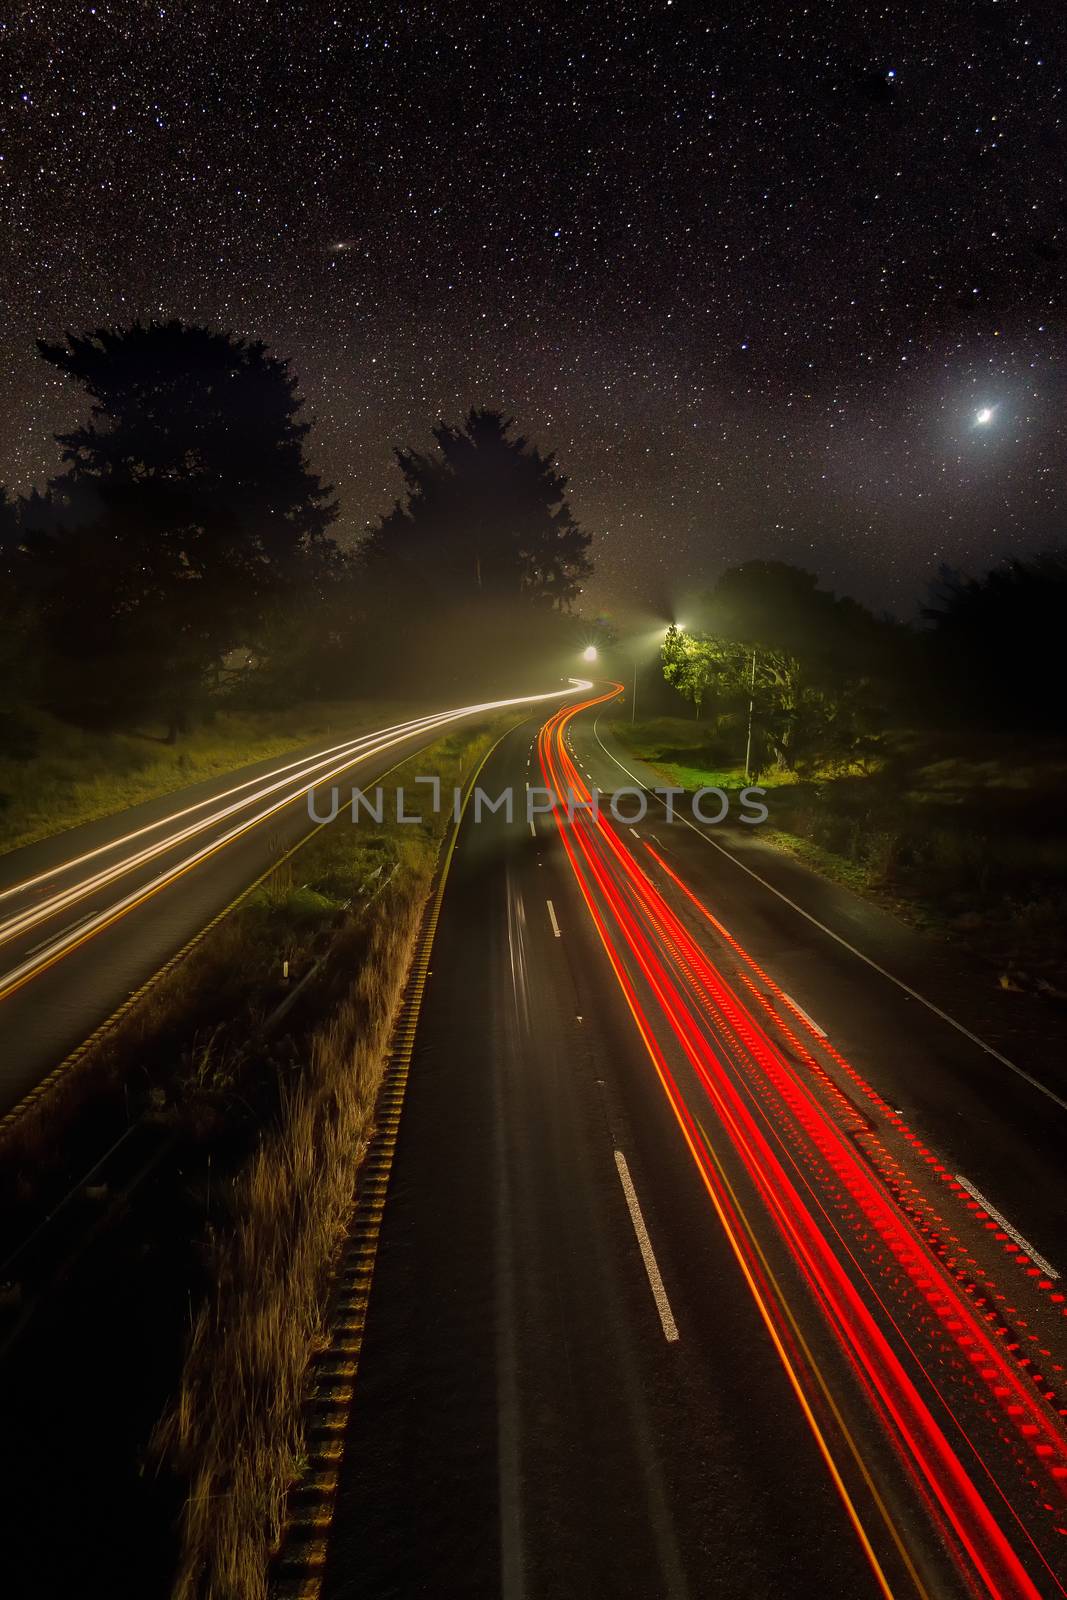 Night Image of Cars on a Highway Under the Stars by backyard_photography